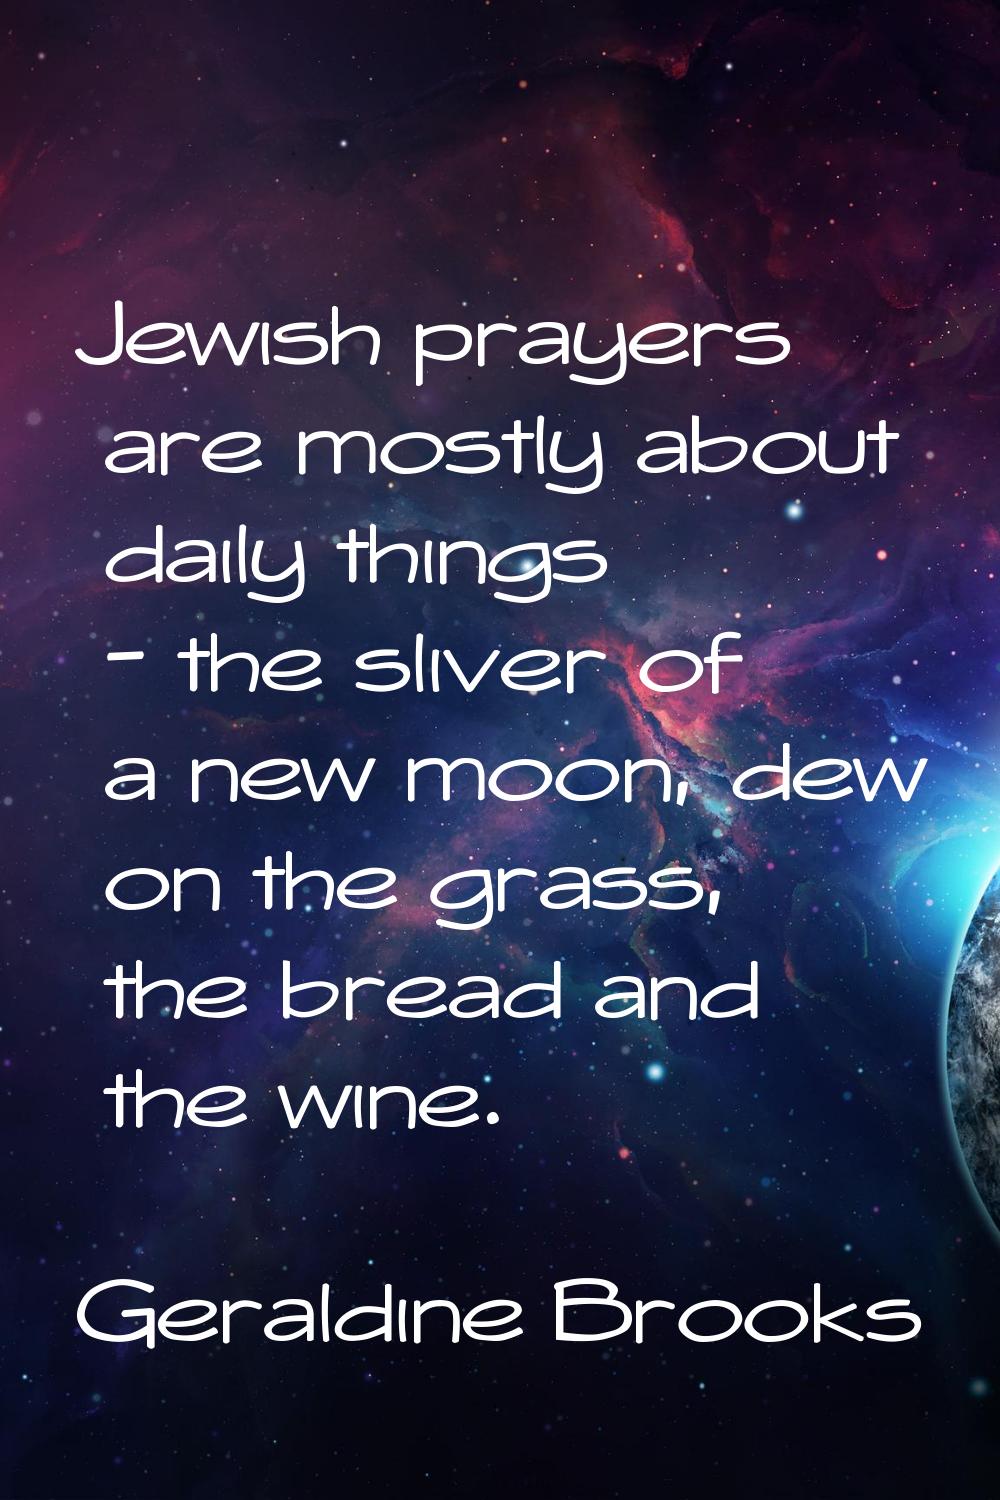 Jewish prayers are mostly about daily things - the sliver of a new moon, dew on the grass, the brea